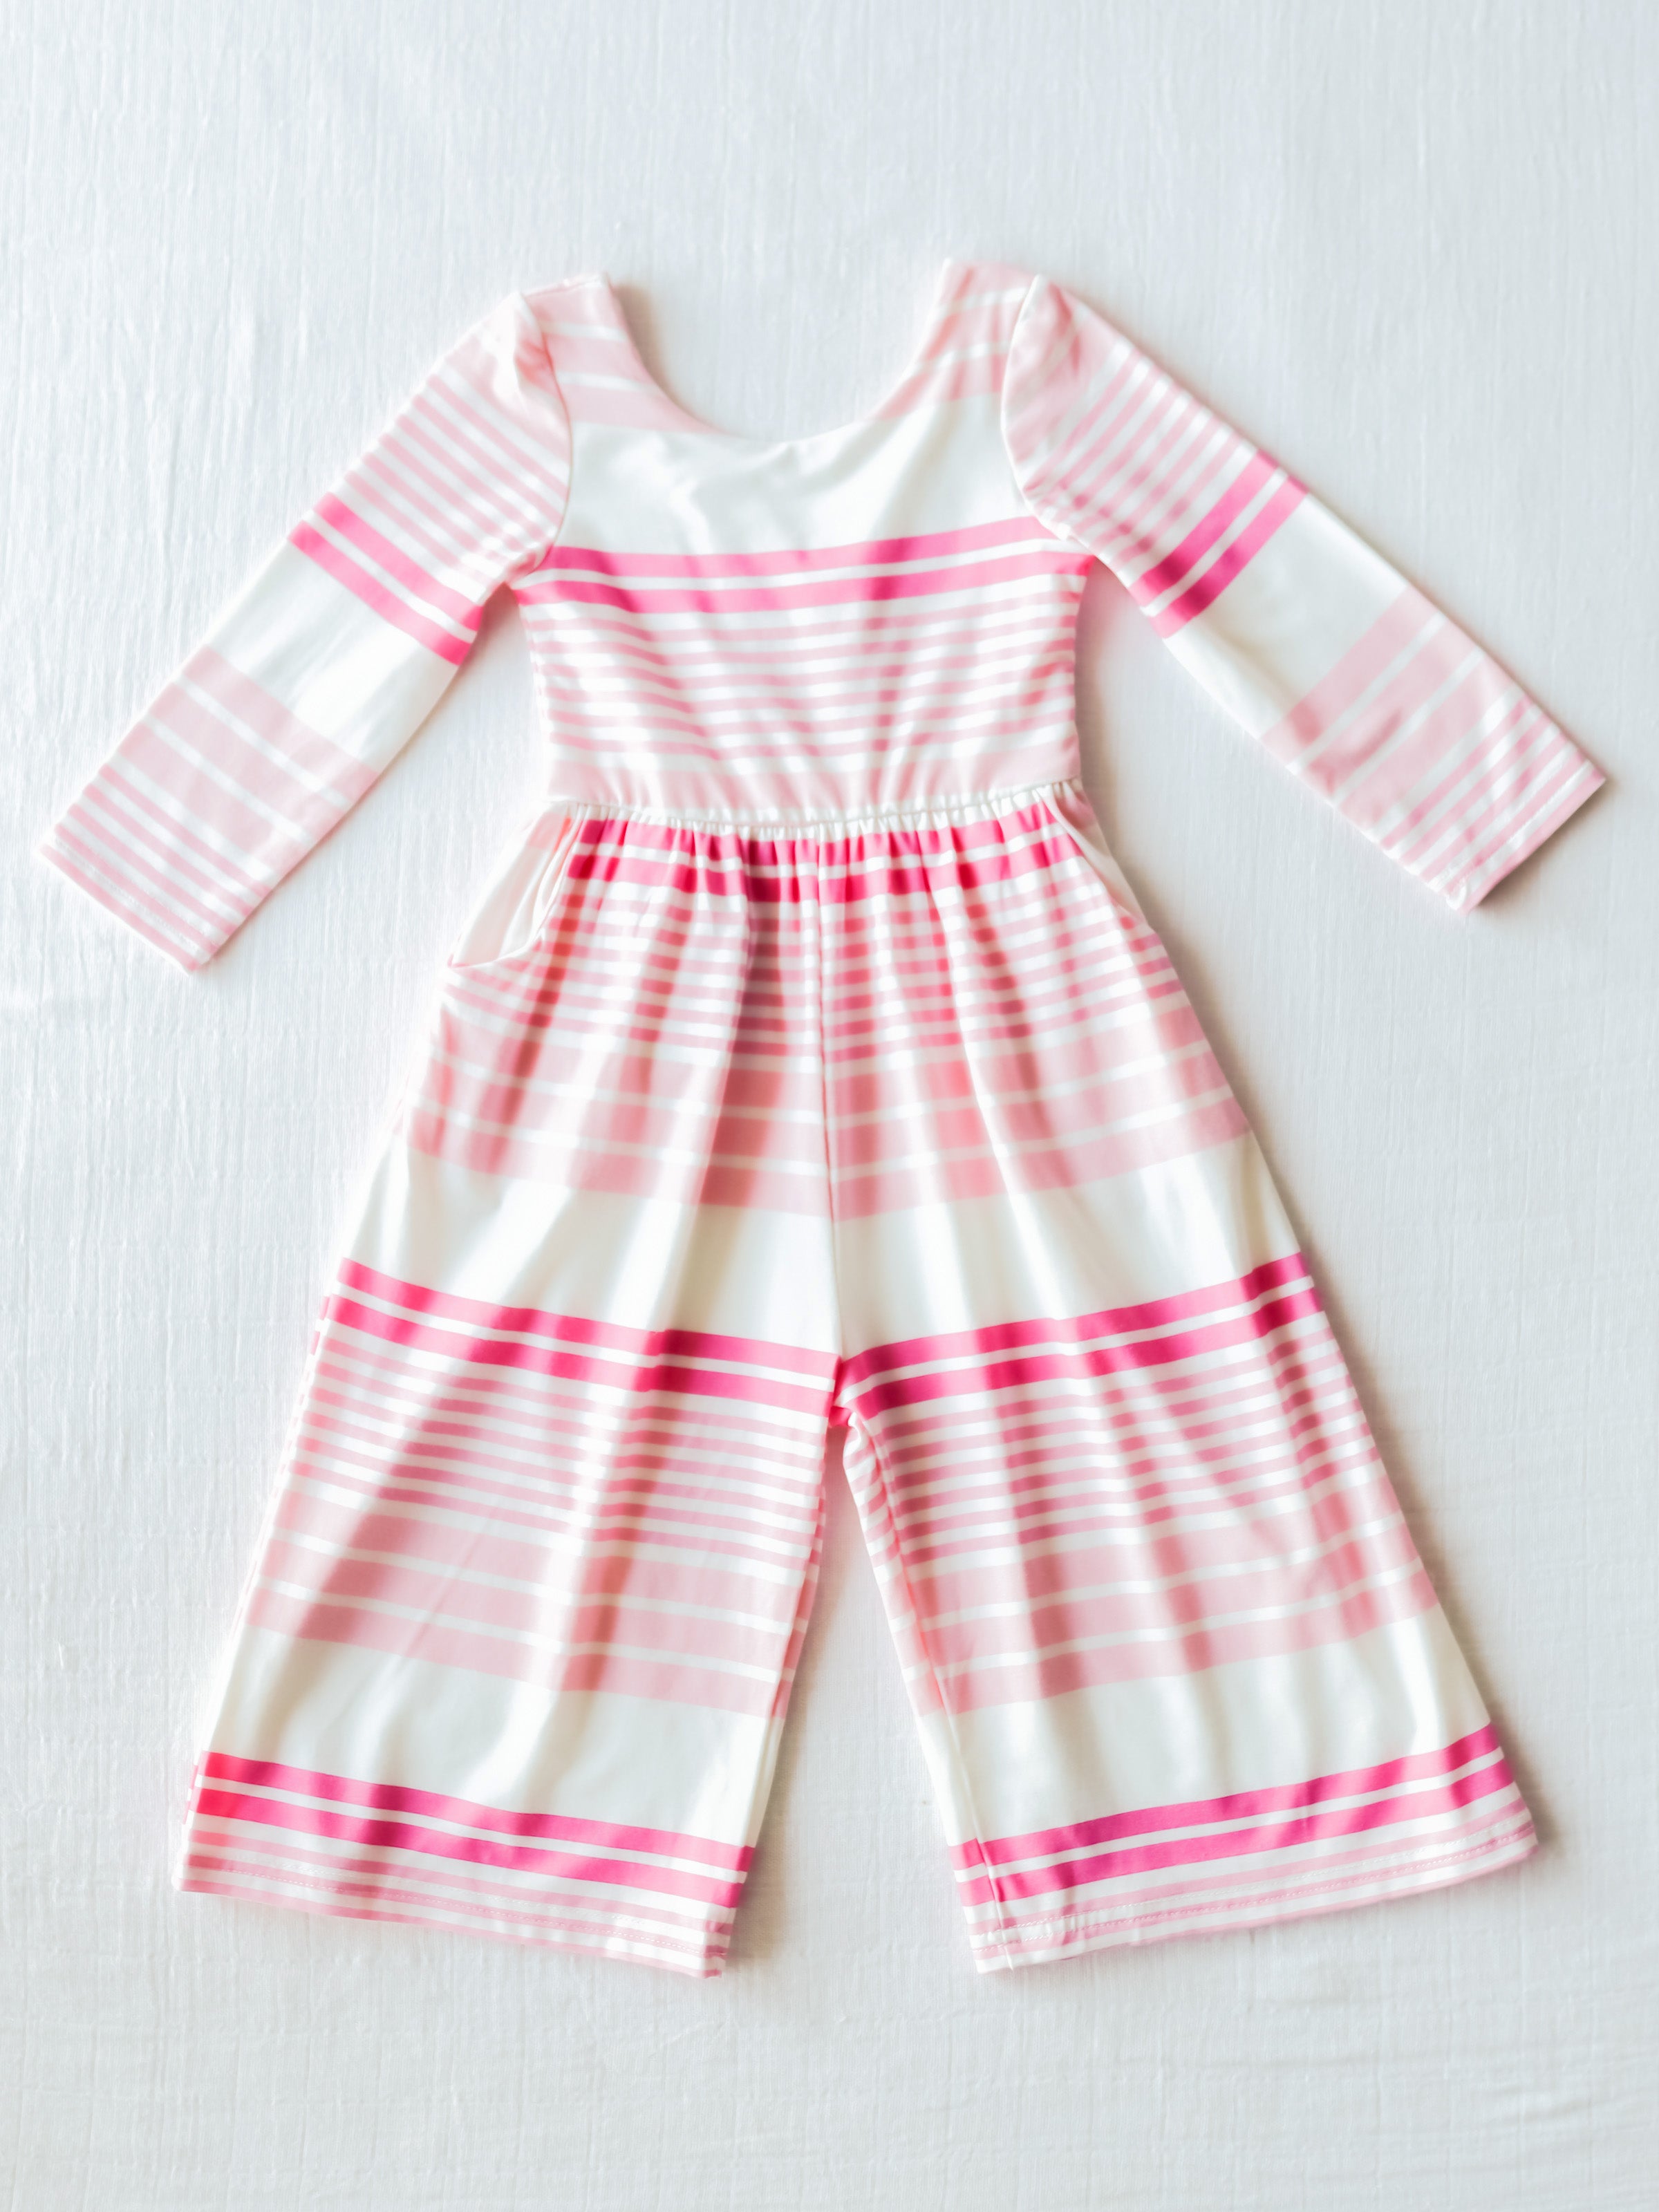 Girls Rompers by SweetHoney Clothing: Picks and Reviews for Stylish  Playtime — Posh Lifestyle & Beauty Blog